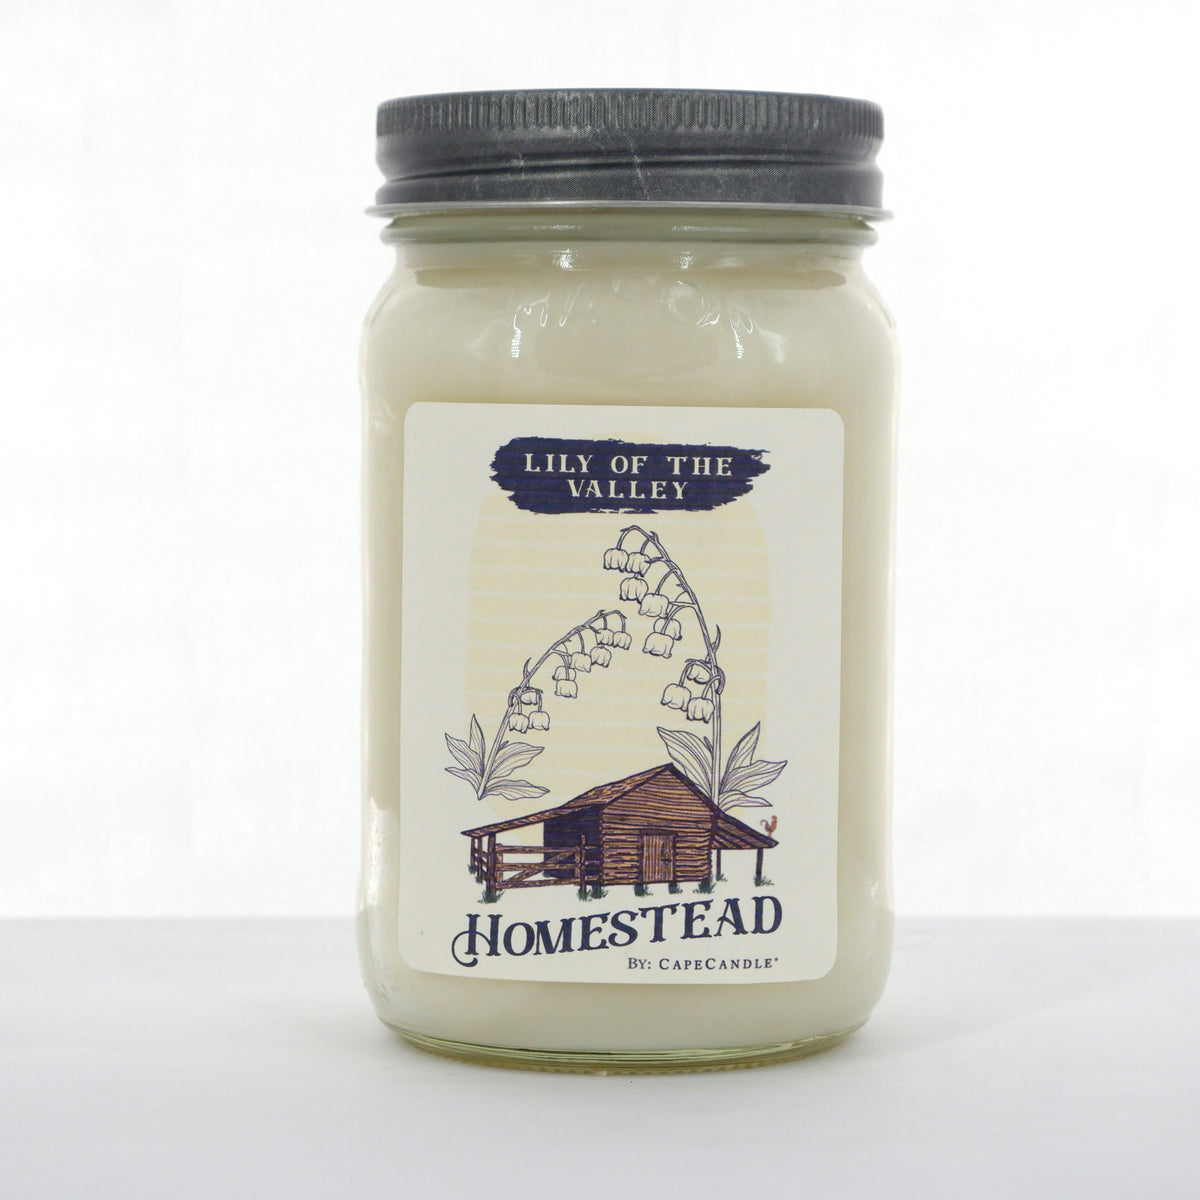 Lily of the Valley Soy Candle 16oz Homestead Mason Jar by Cape Candle